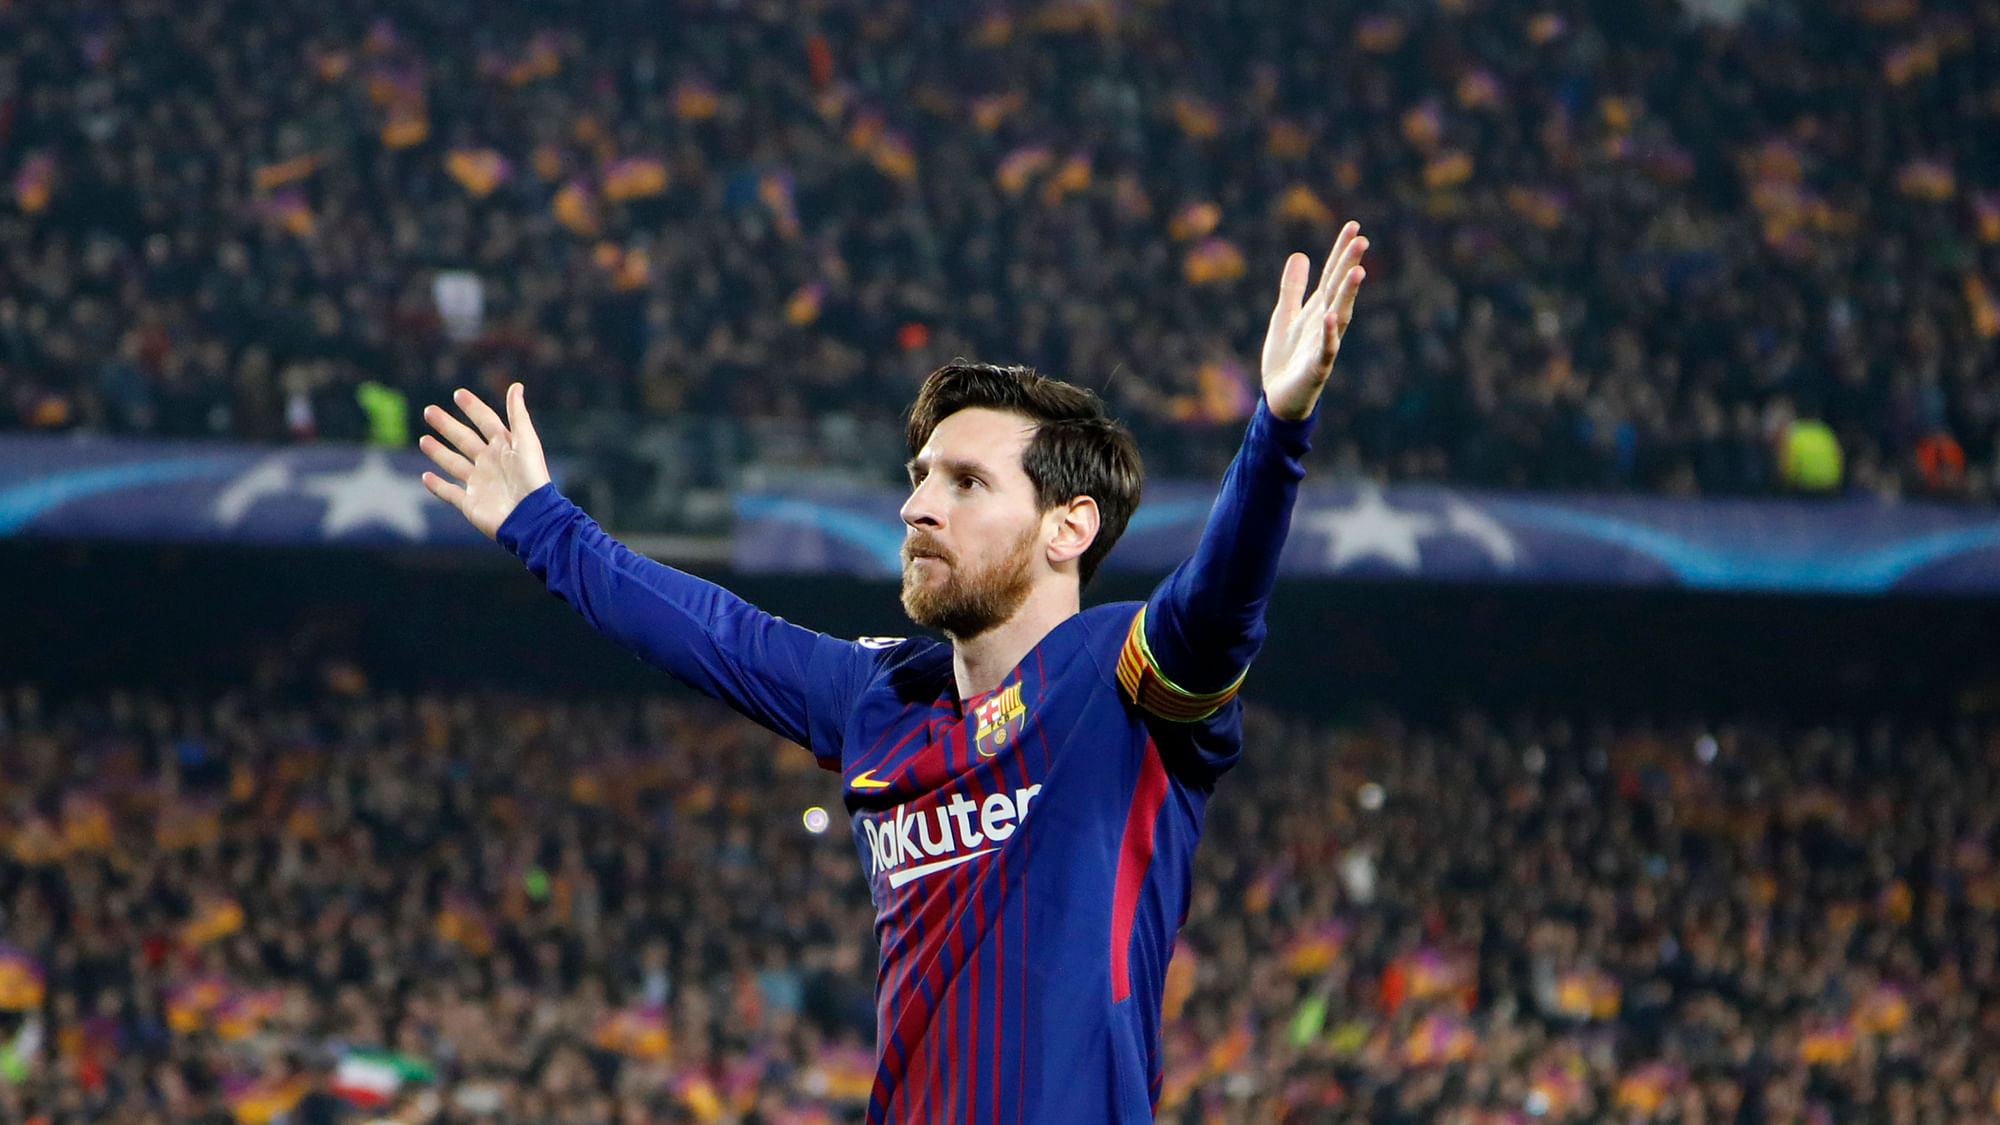 Barcelona’s Lionel Messi celebrates after scoring his side’s third goal during the Champions League round of sixteen second leg soccer match between FC Barcelona and Chelsea at the Camp Nou stadium in Barcelona, Spain